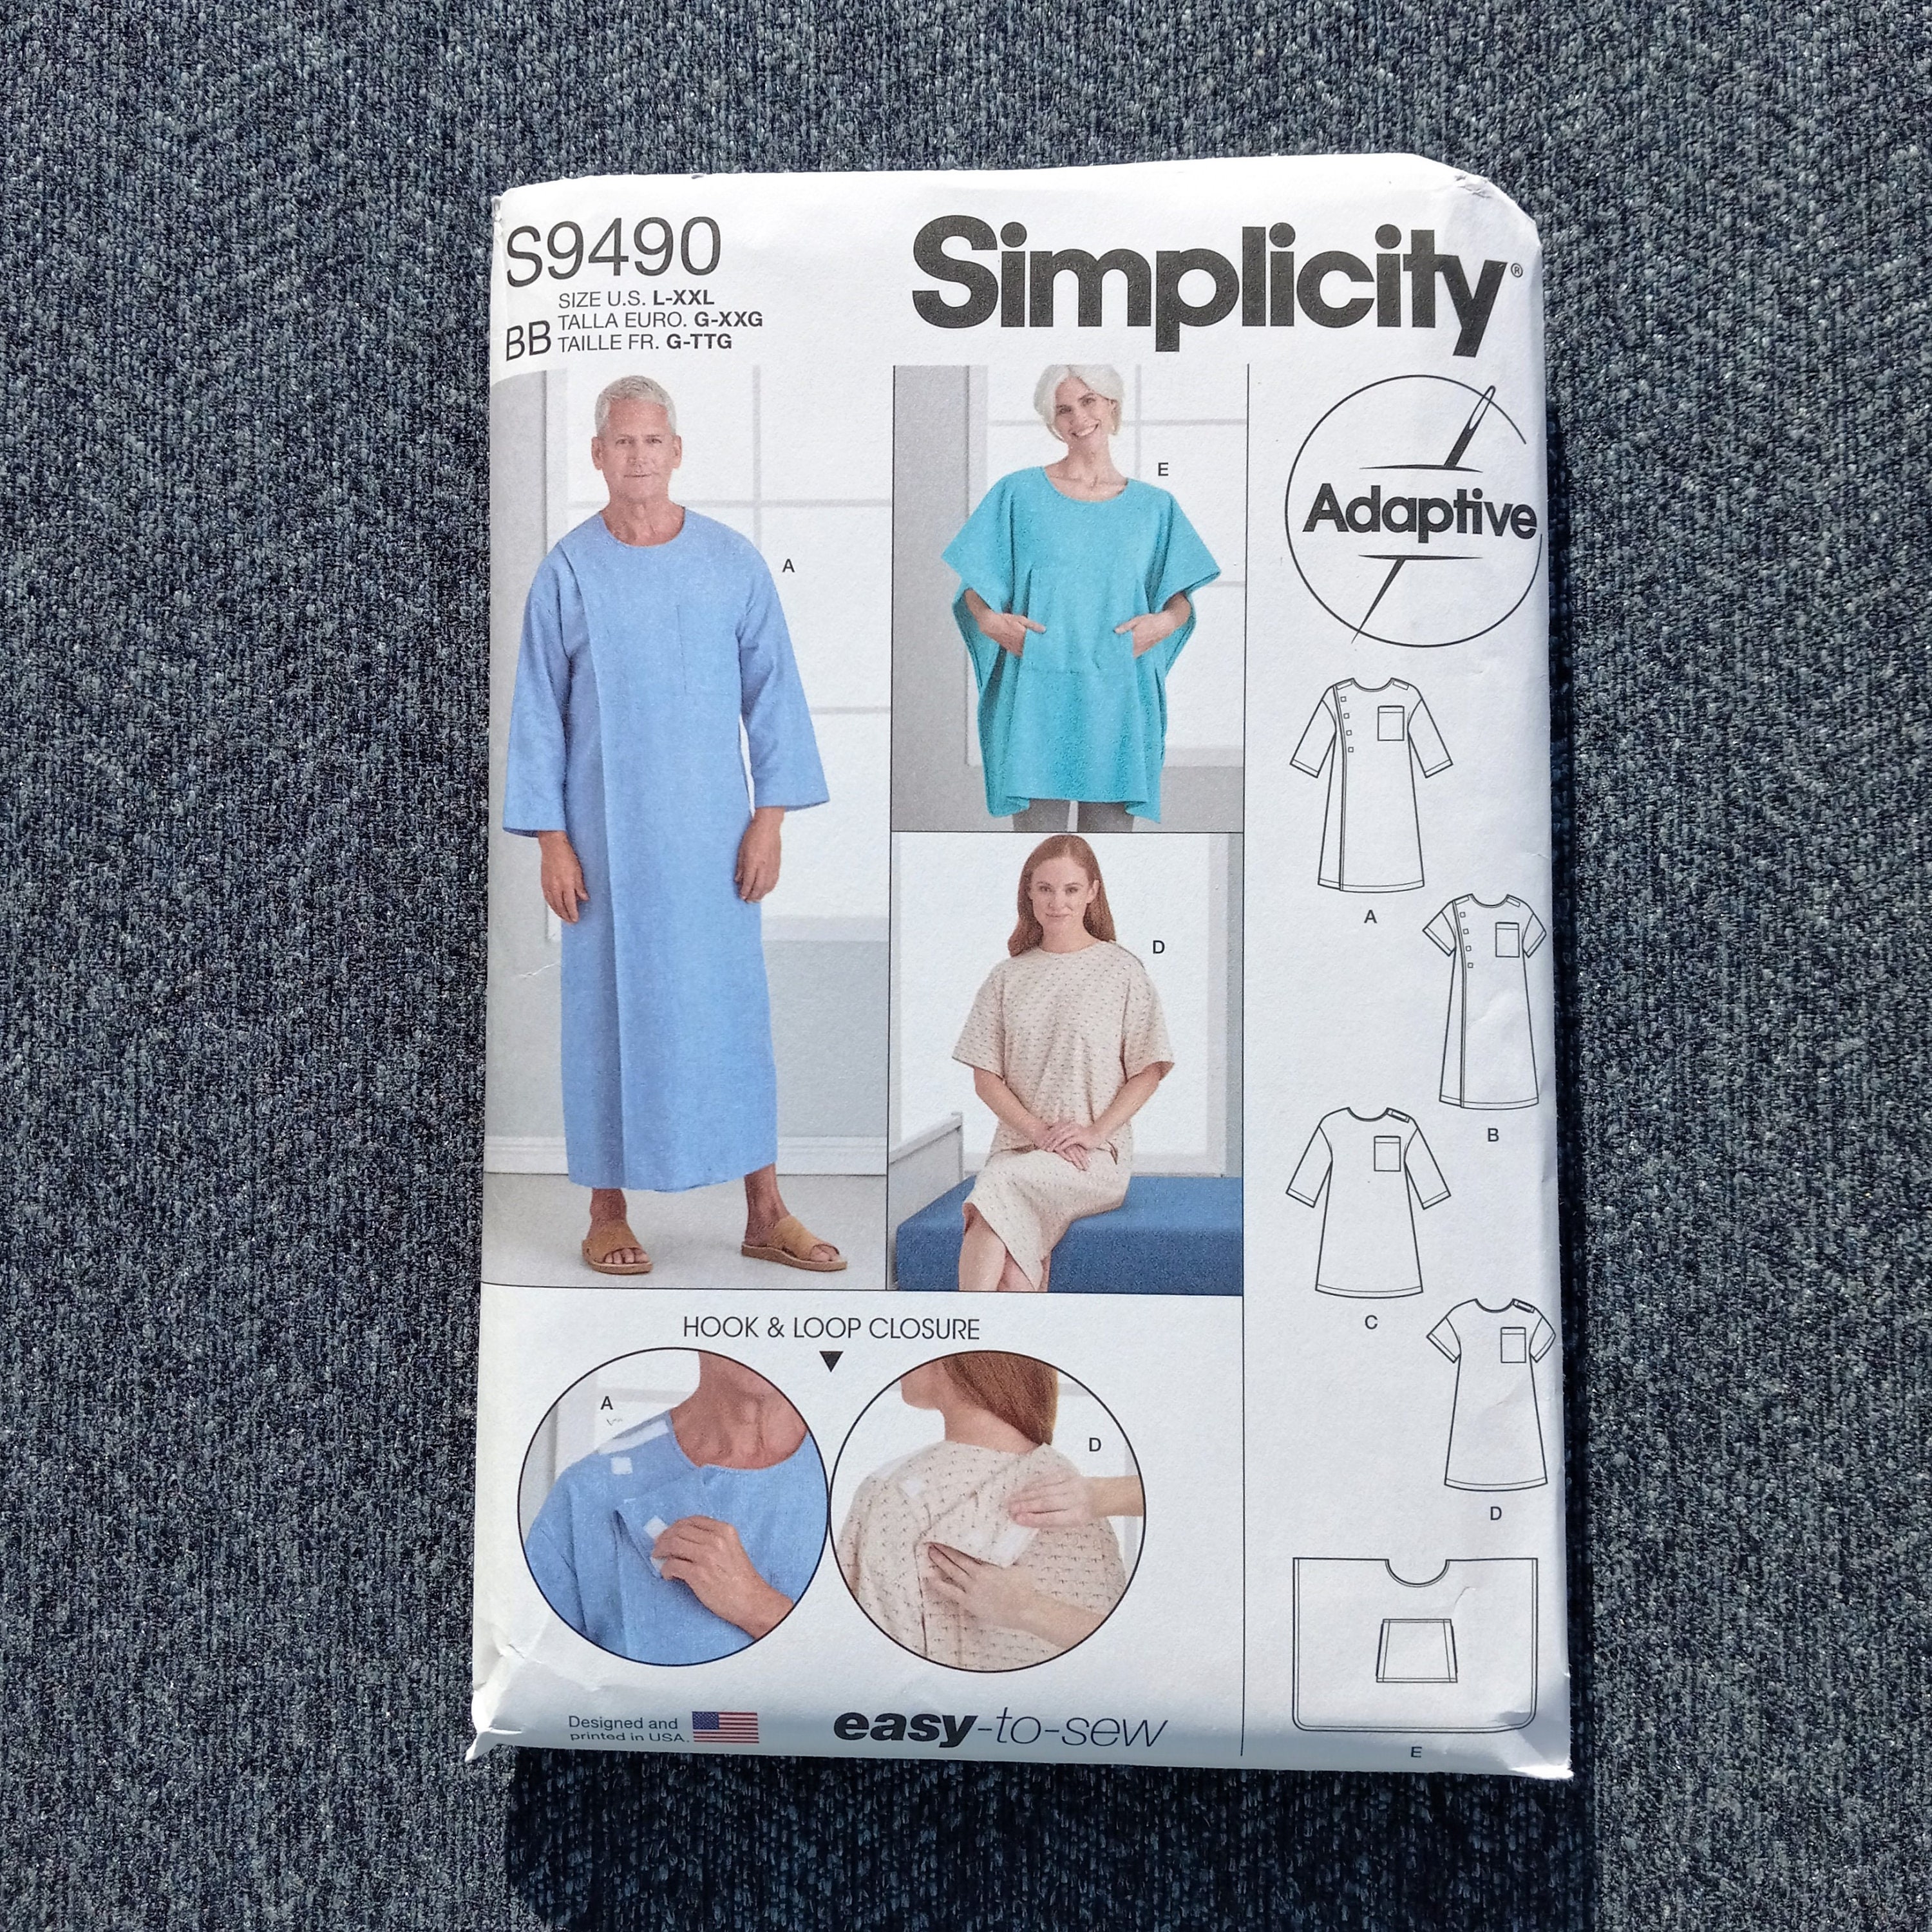 Simplicity R11311 ADAPTIVE Hospital Recovery Gowns, Bed Robe UNISEX XS-M  S9490 | eBay